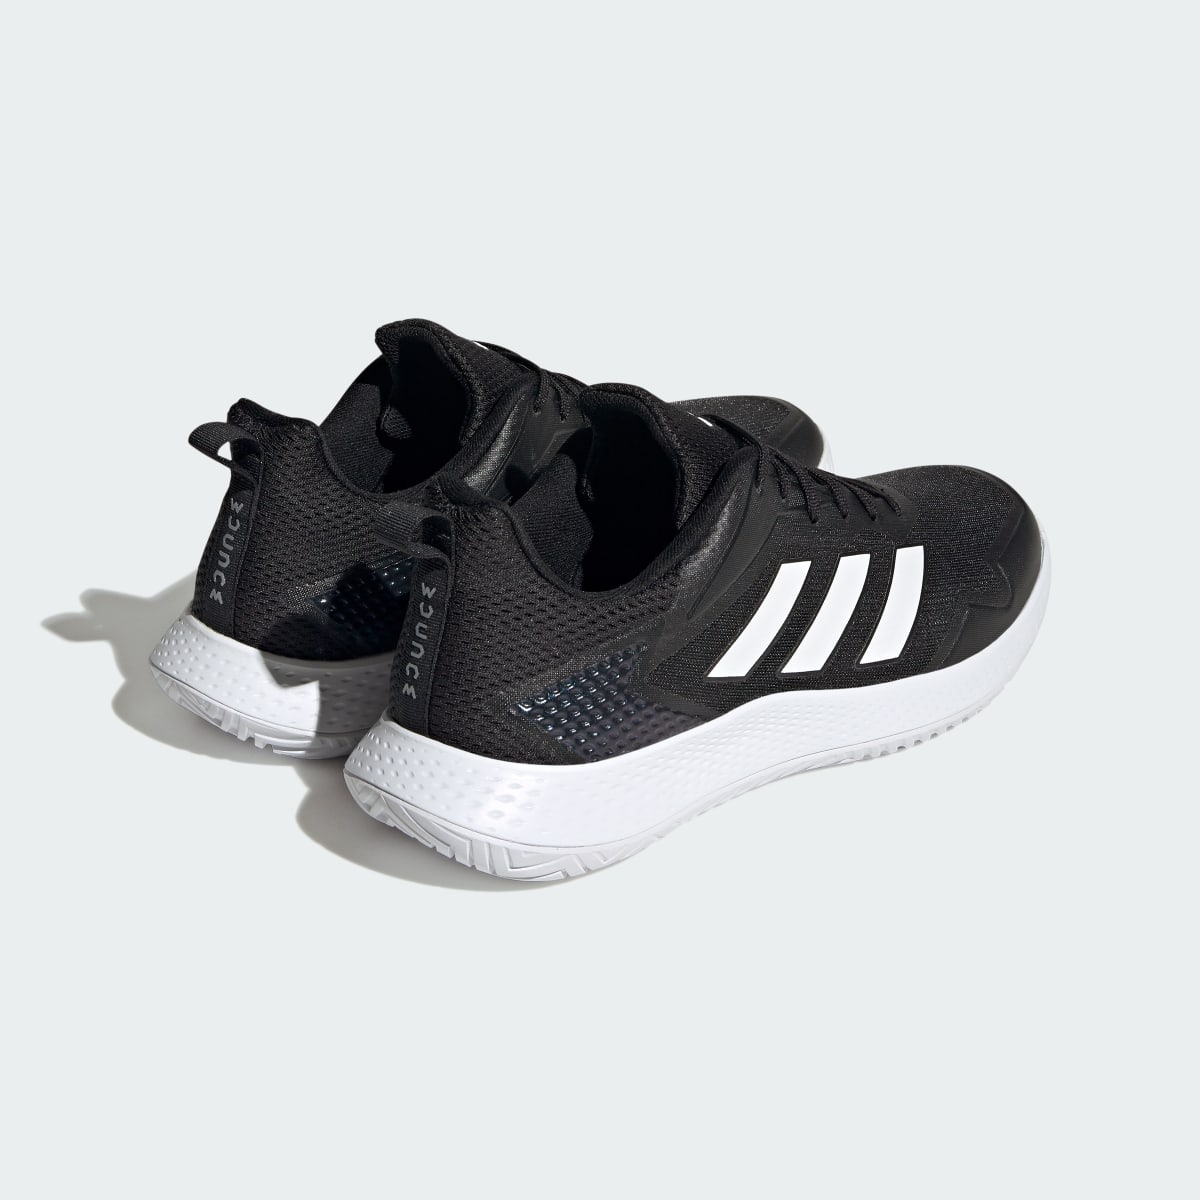 Adidas Defiant Speed Tennis Shoes. 6